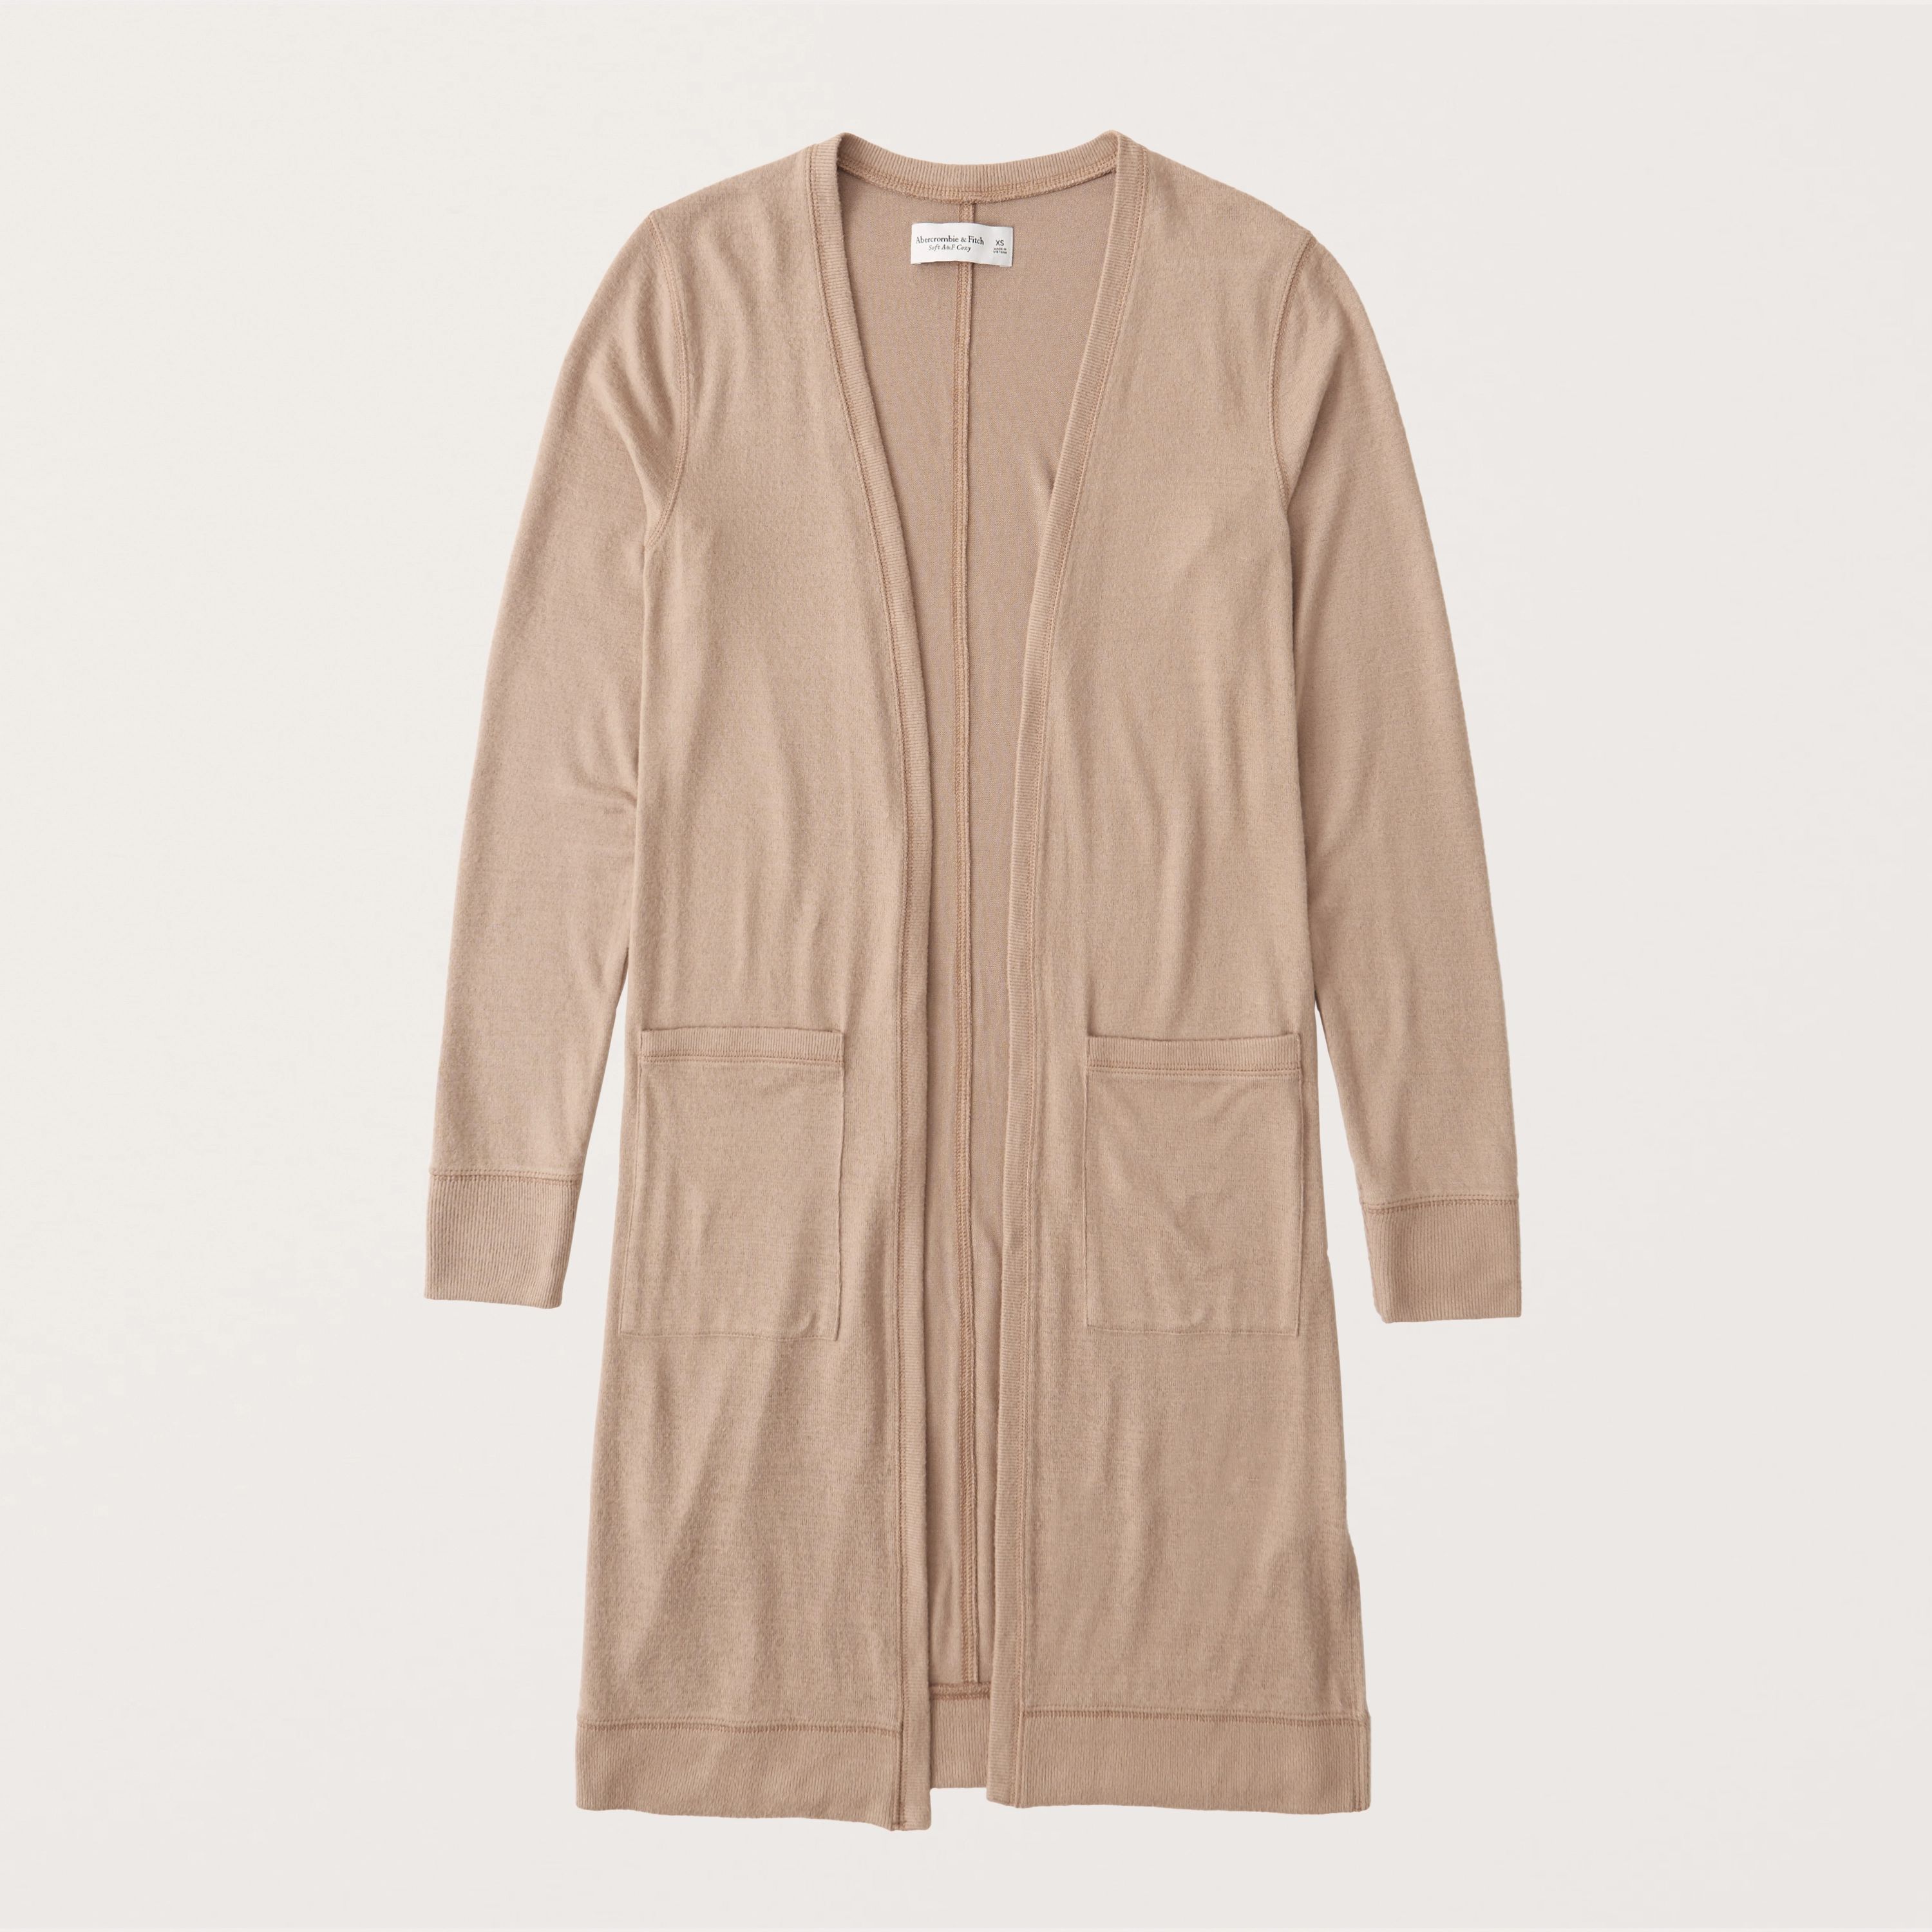 Cozy Duster Cardigan | Abercrombie & Fitch (US)